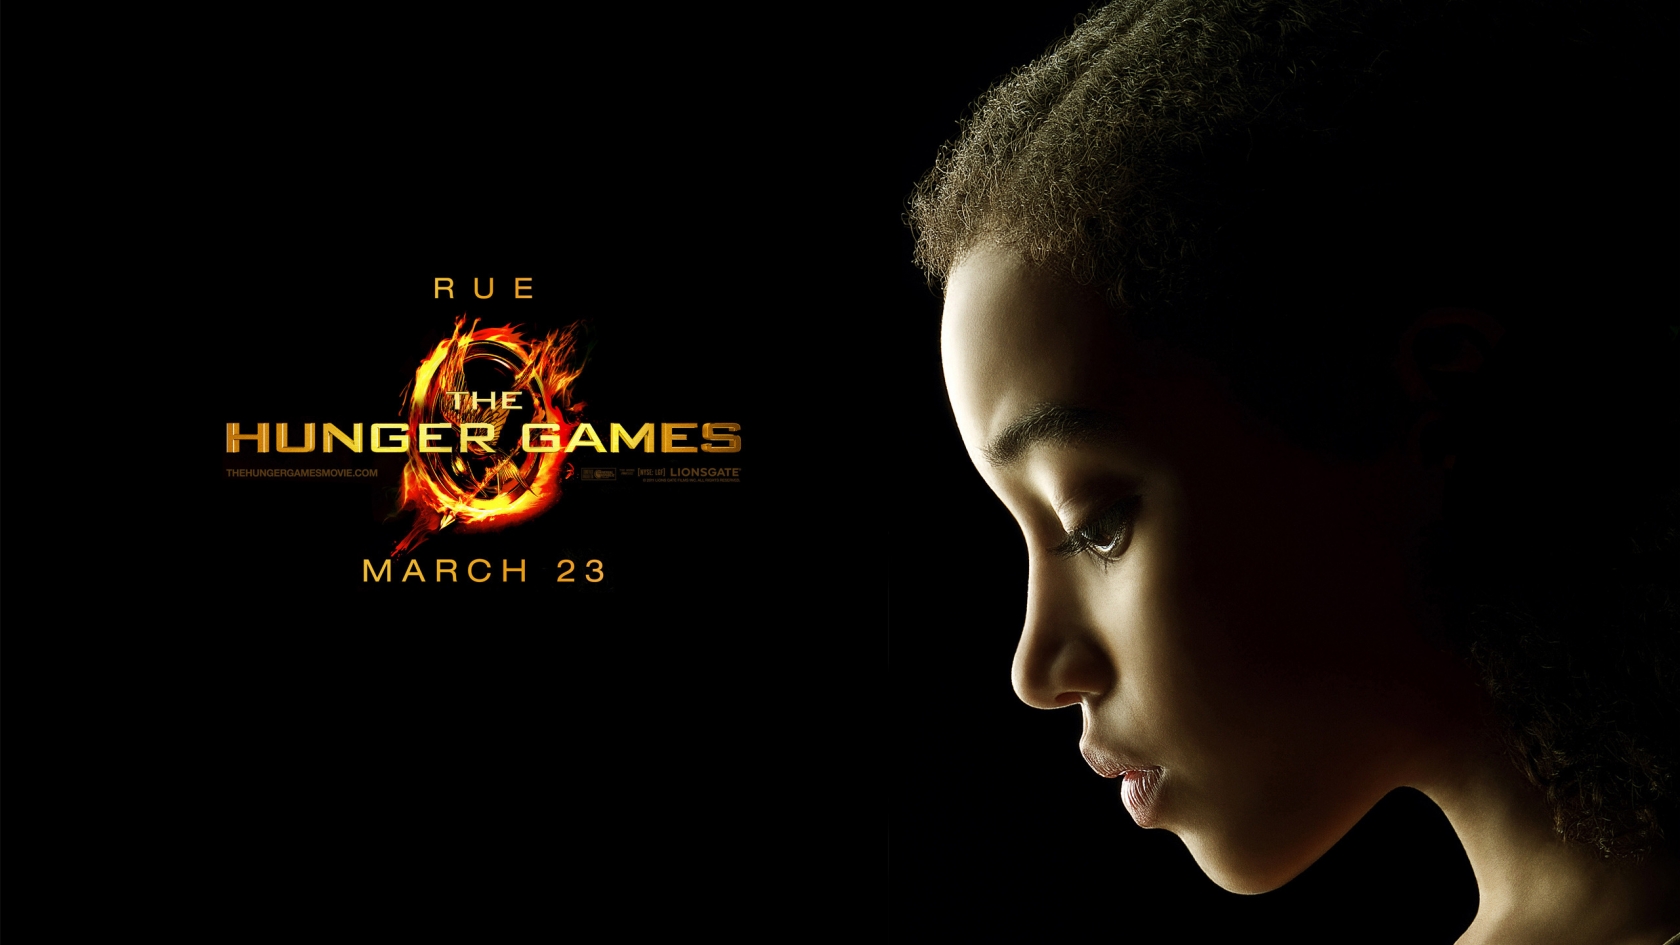 The Hunger Games Rue for 1680 x 945 HDTV resolution